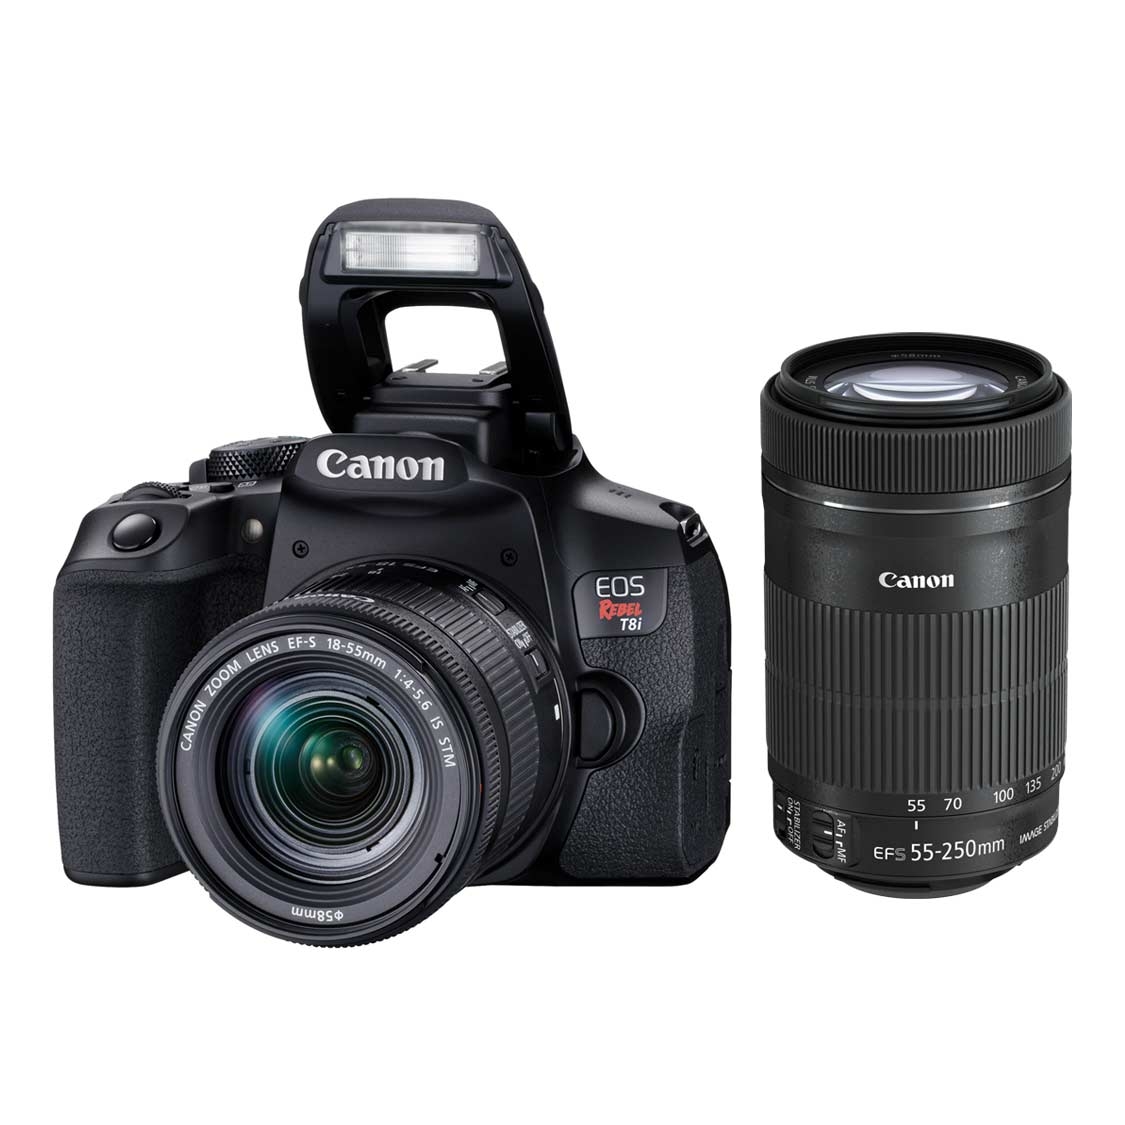 Canon Rebel T8i DSLR with 18-55mm IS STM and 55-250mm IS STM Lenses